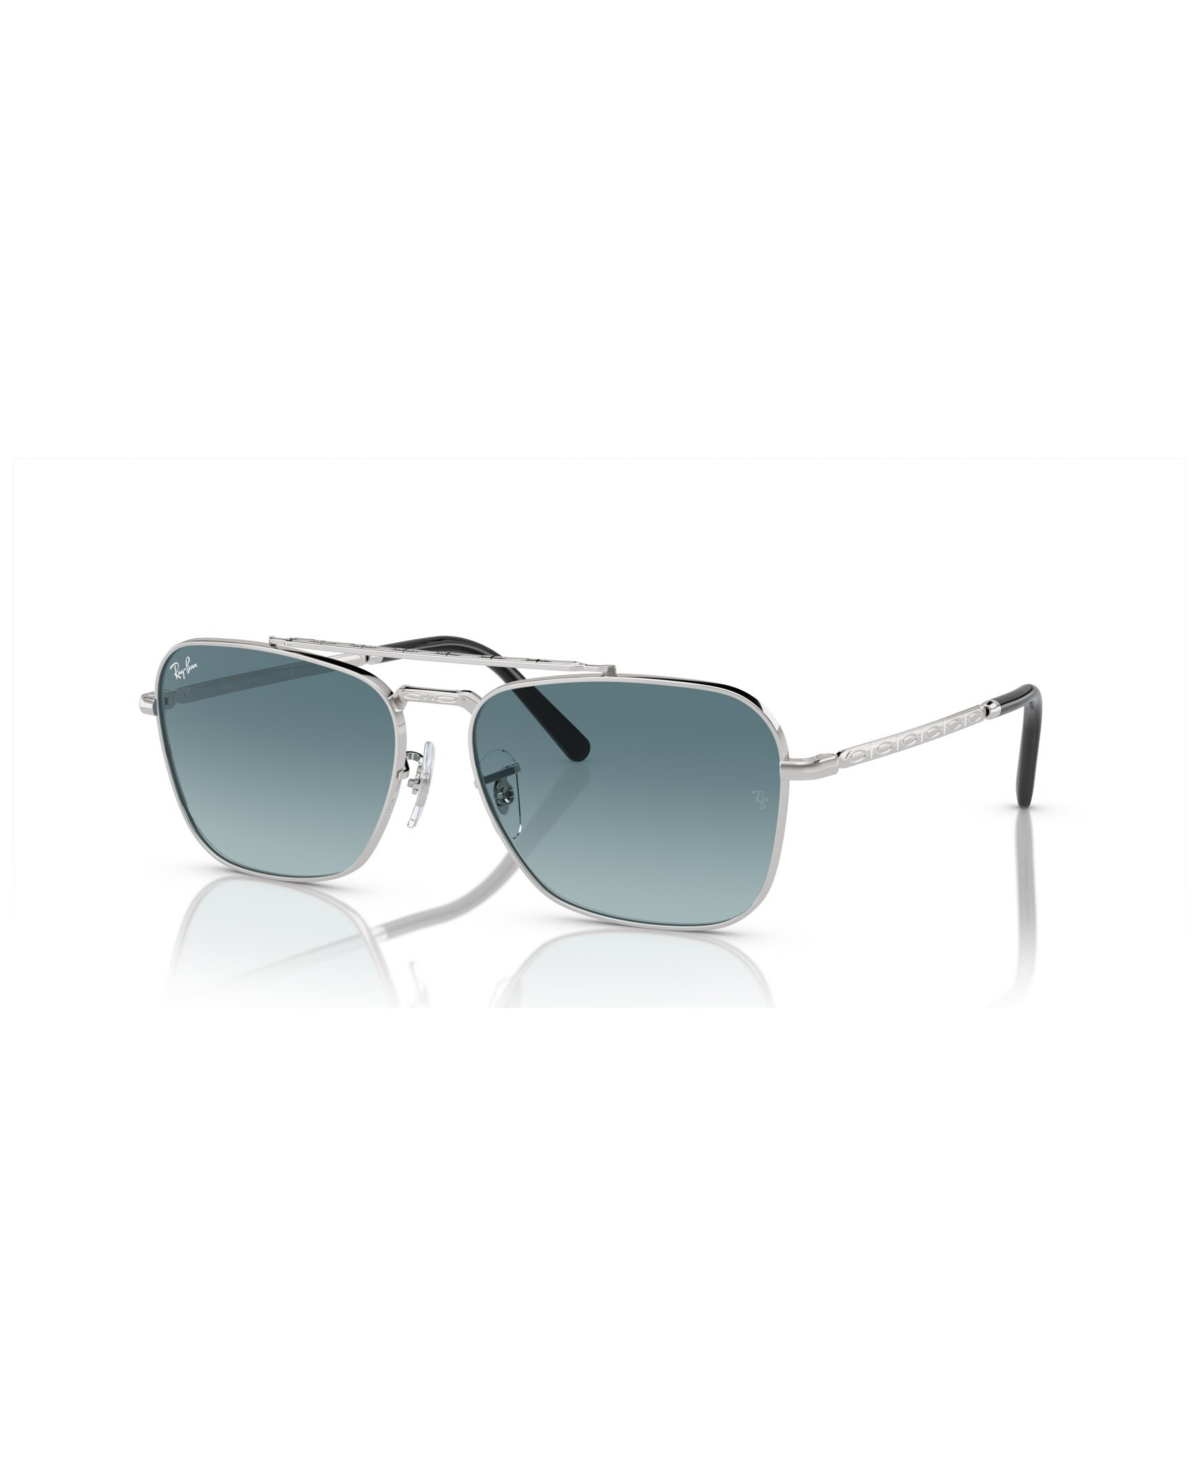 Ray Ban Unisex New Caravan Sunglasses, Gradient Rb3636 In Silver